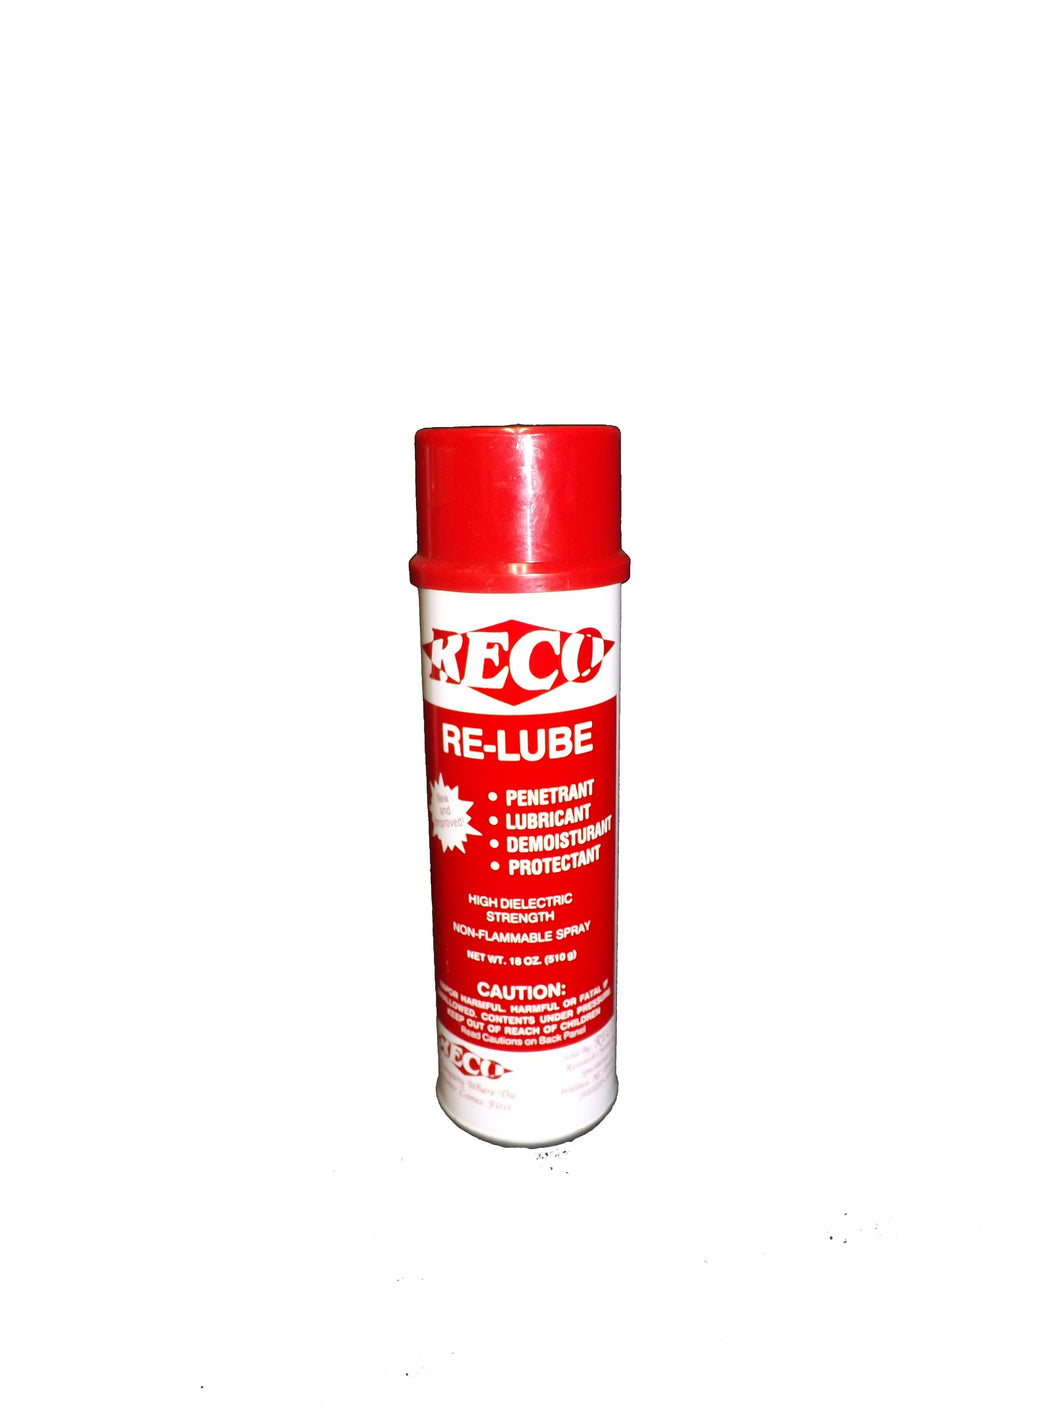 RECO RE-LUBE PENETRATING LUBRICANT